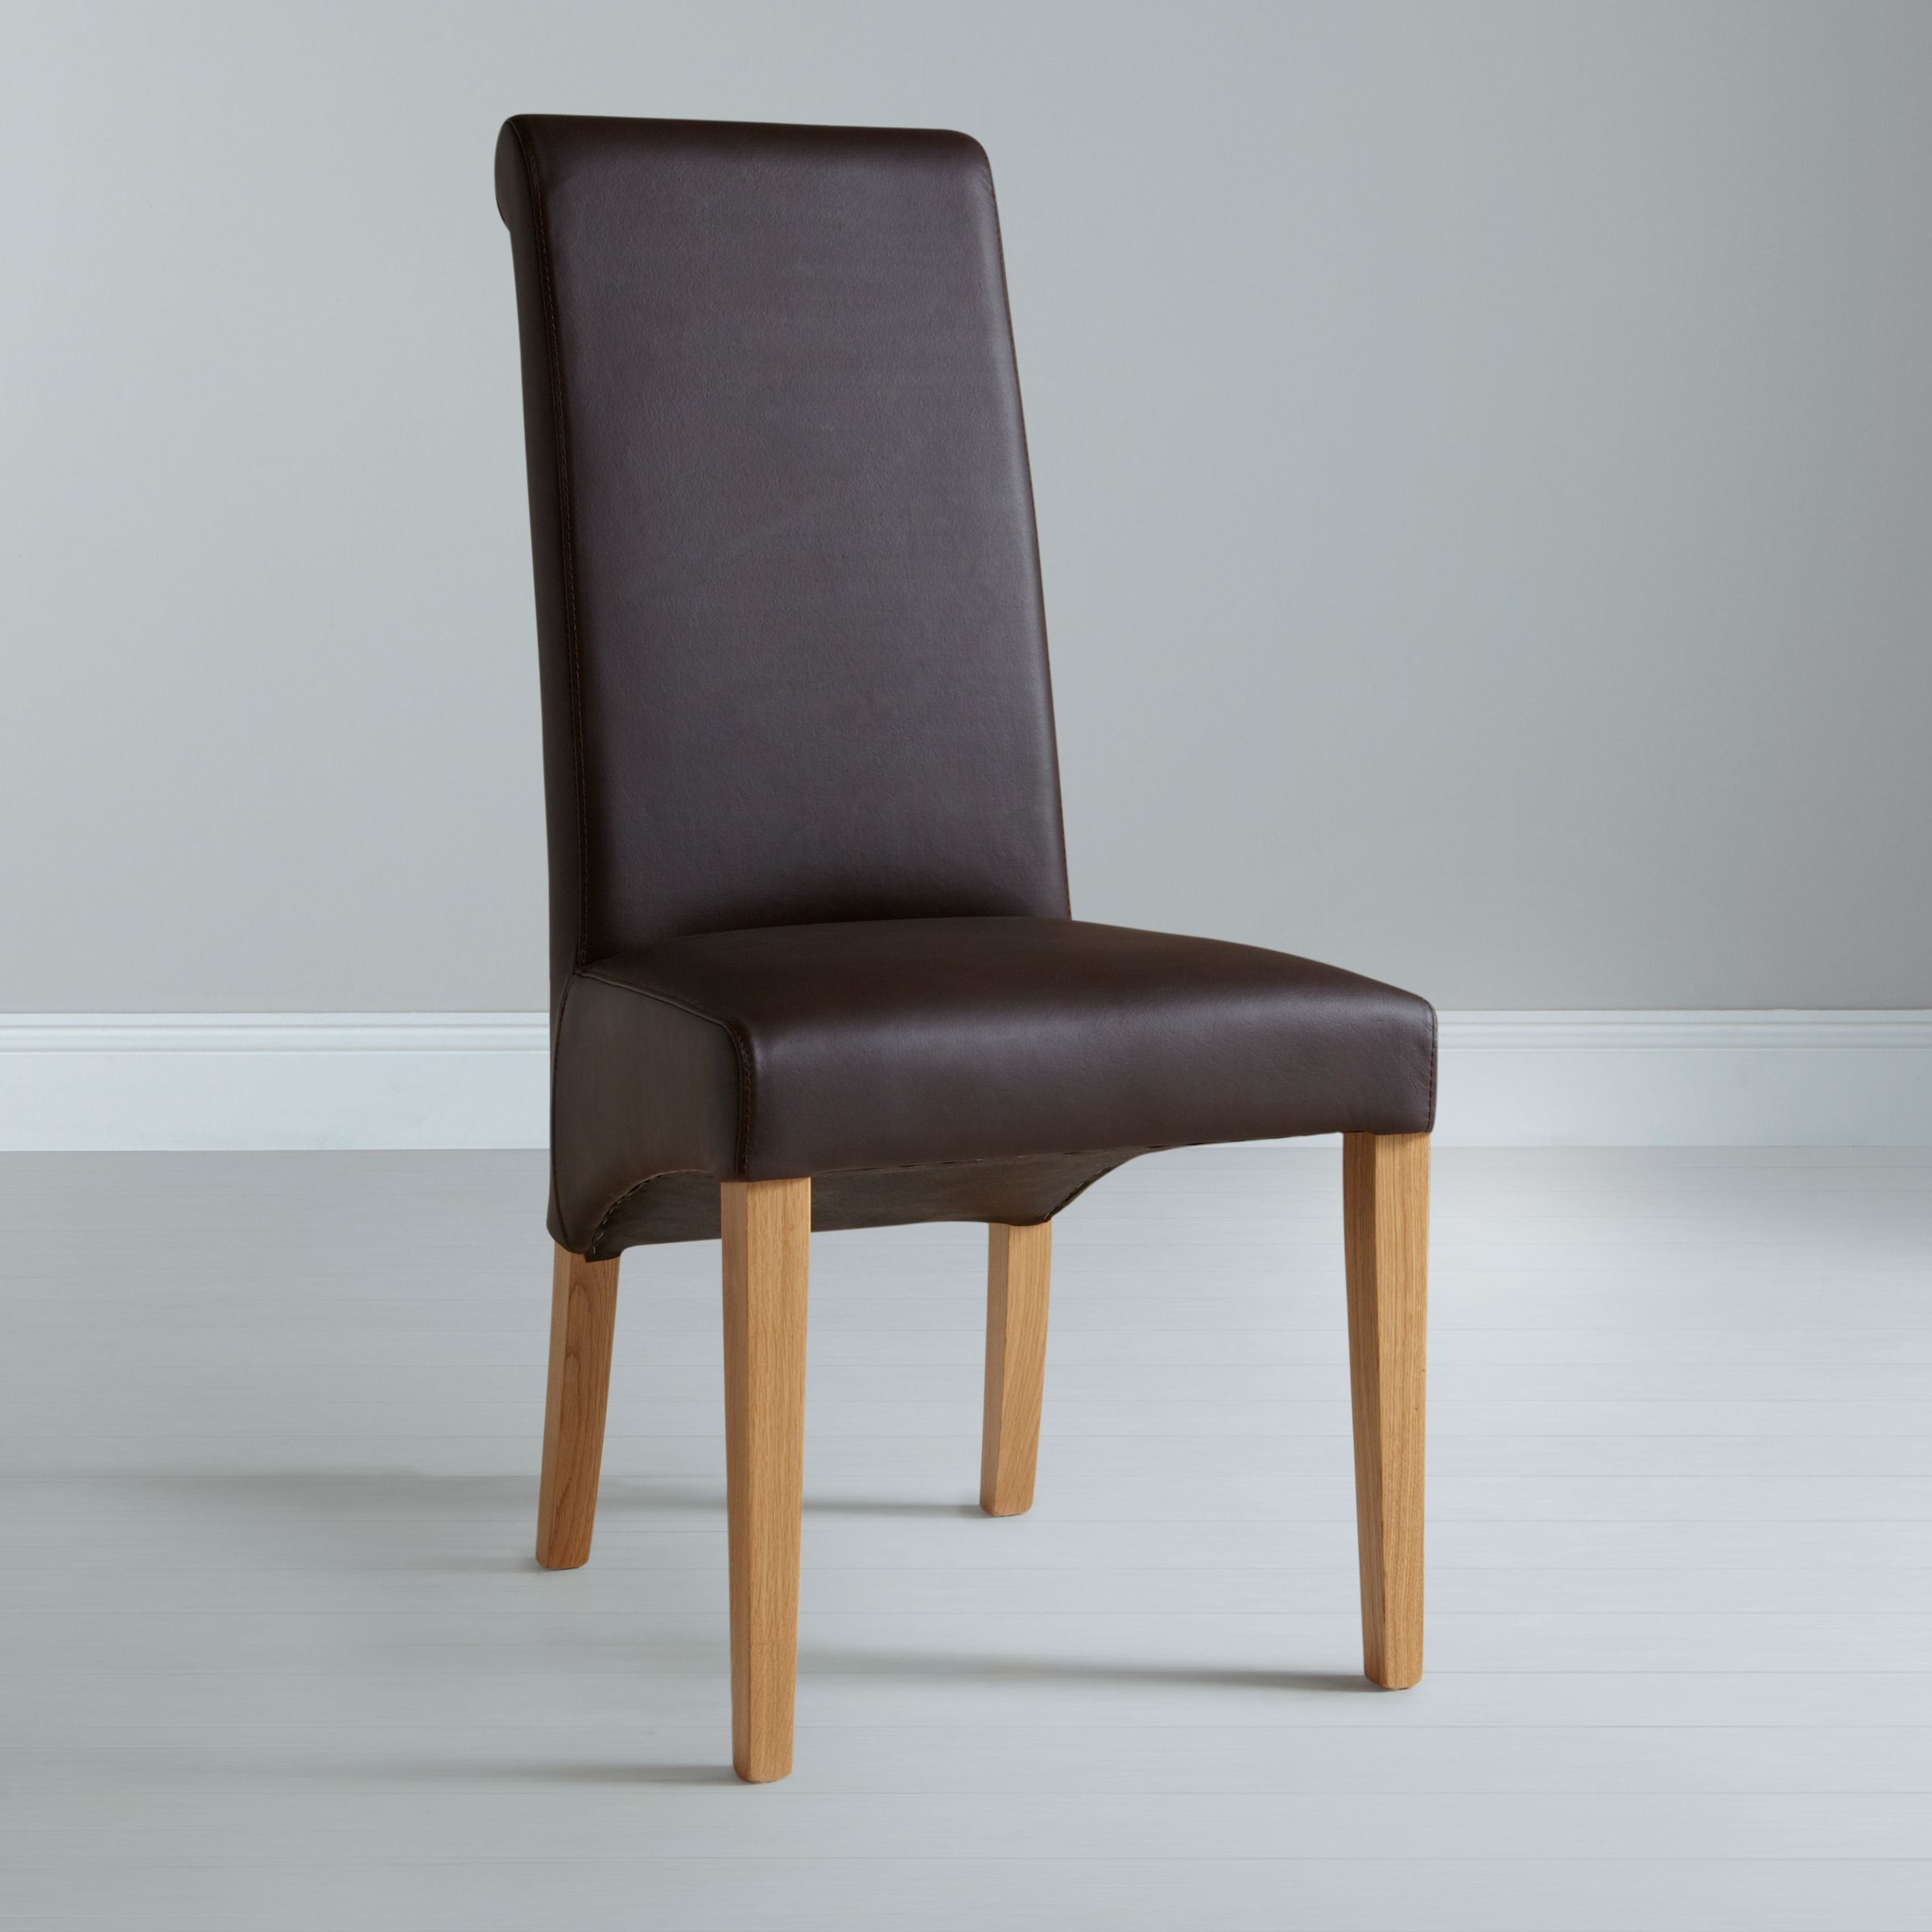 John Lewis Patricia Leather Dining Chair, Brown